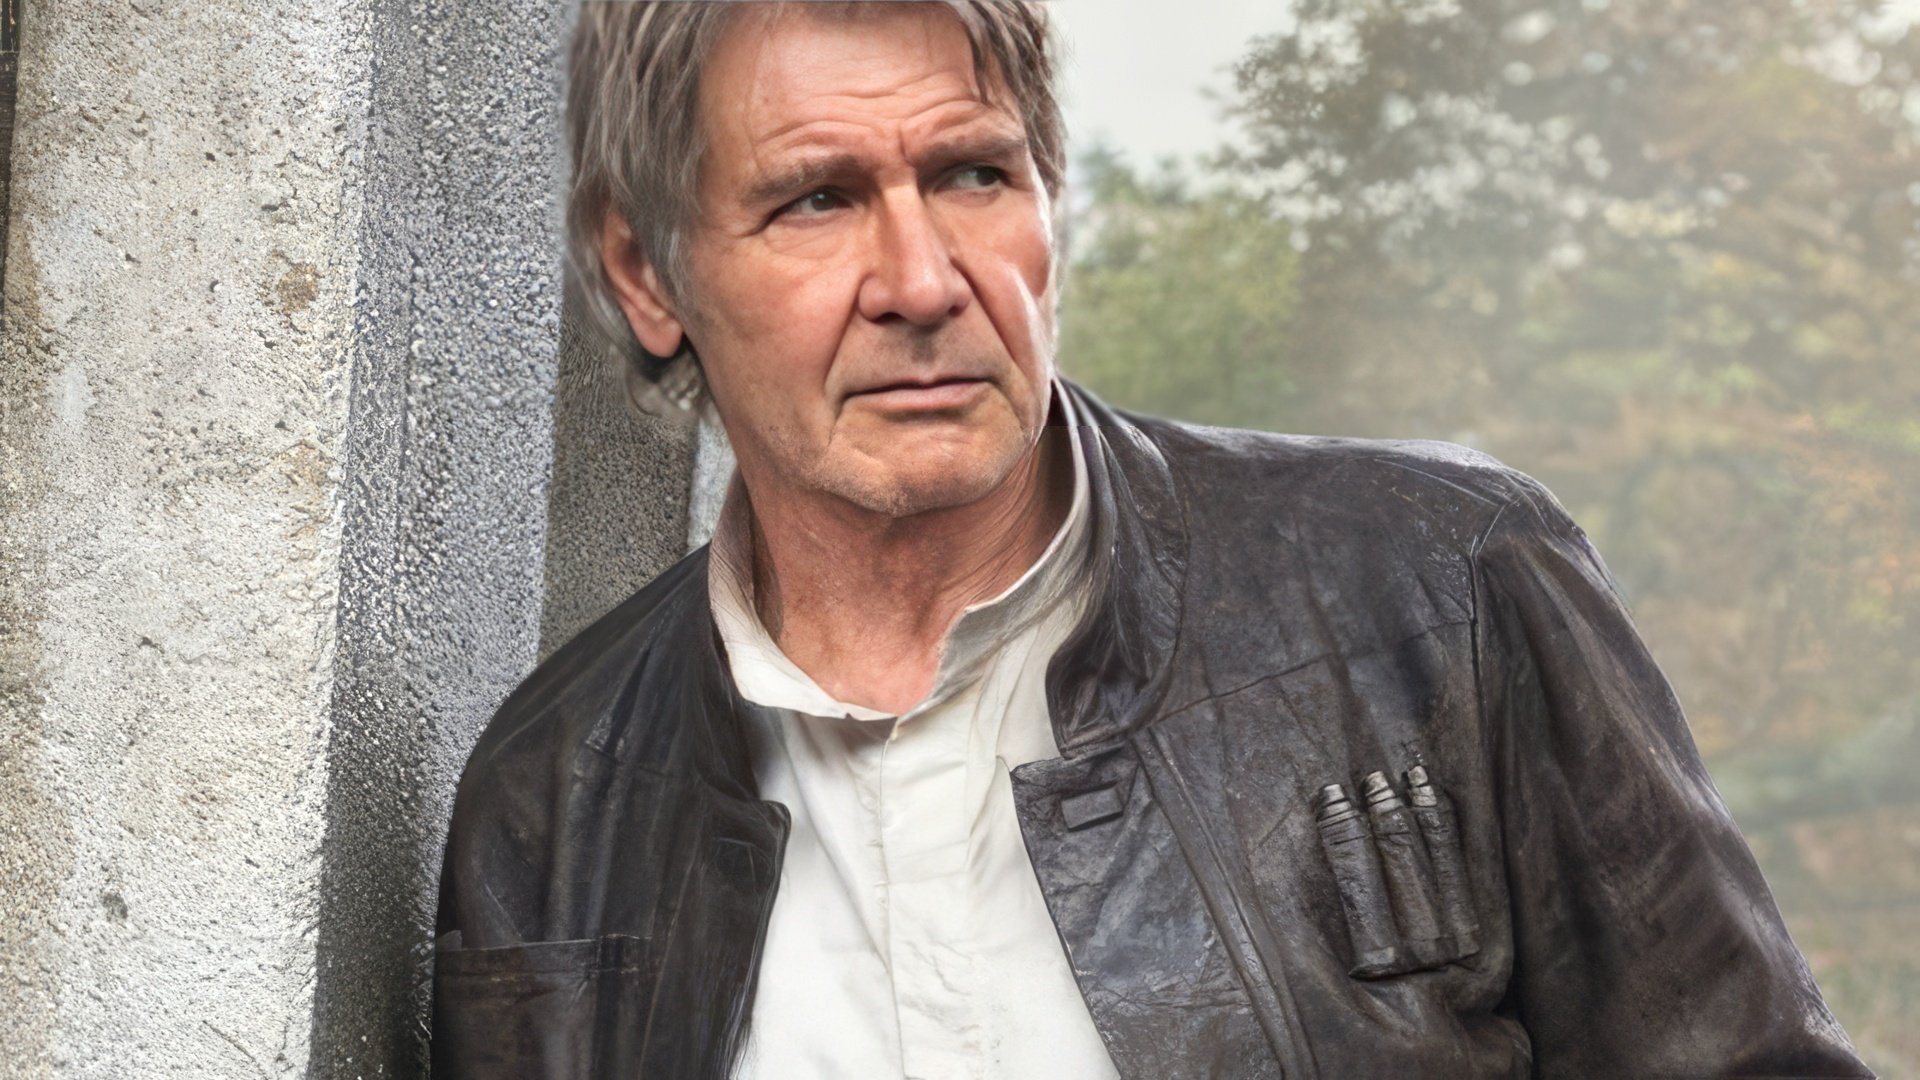 No need to be introduced, actor Harrison Ford